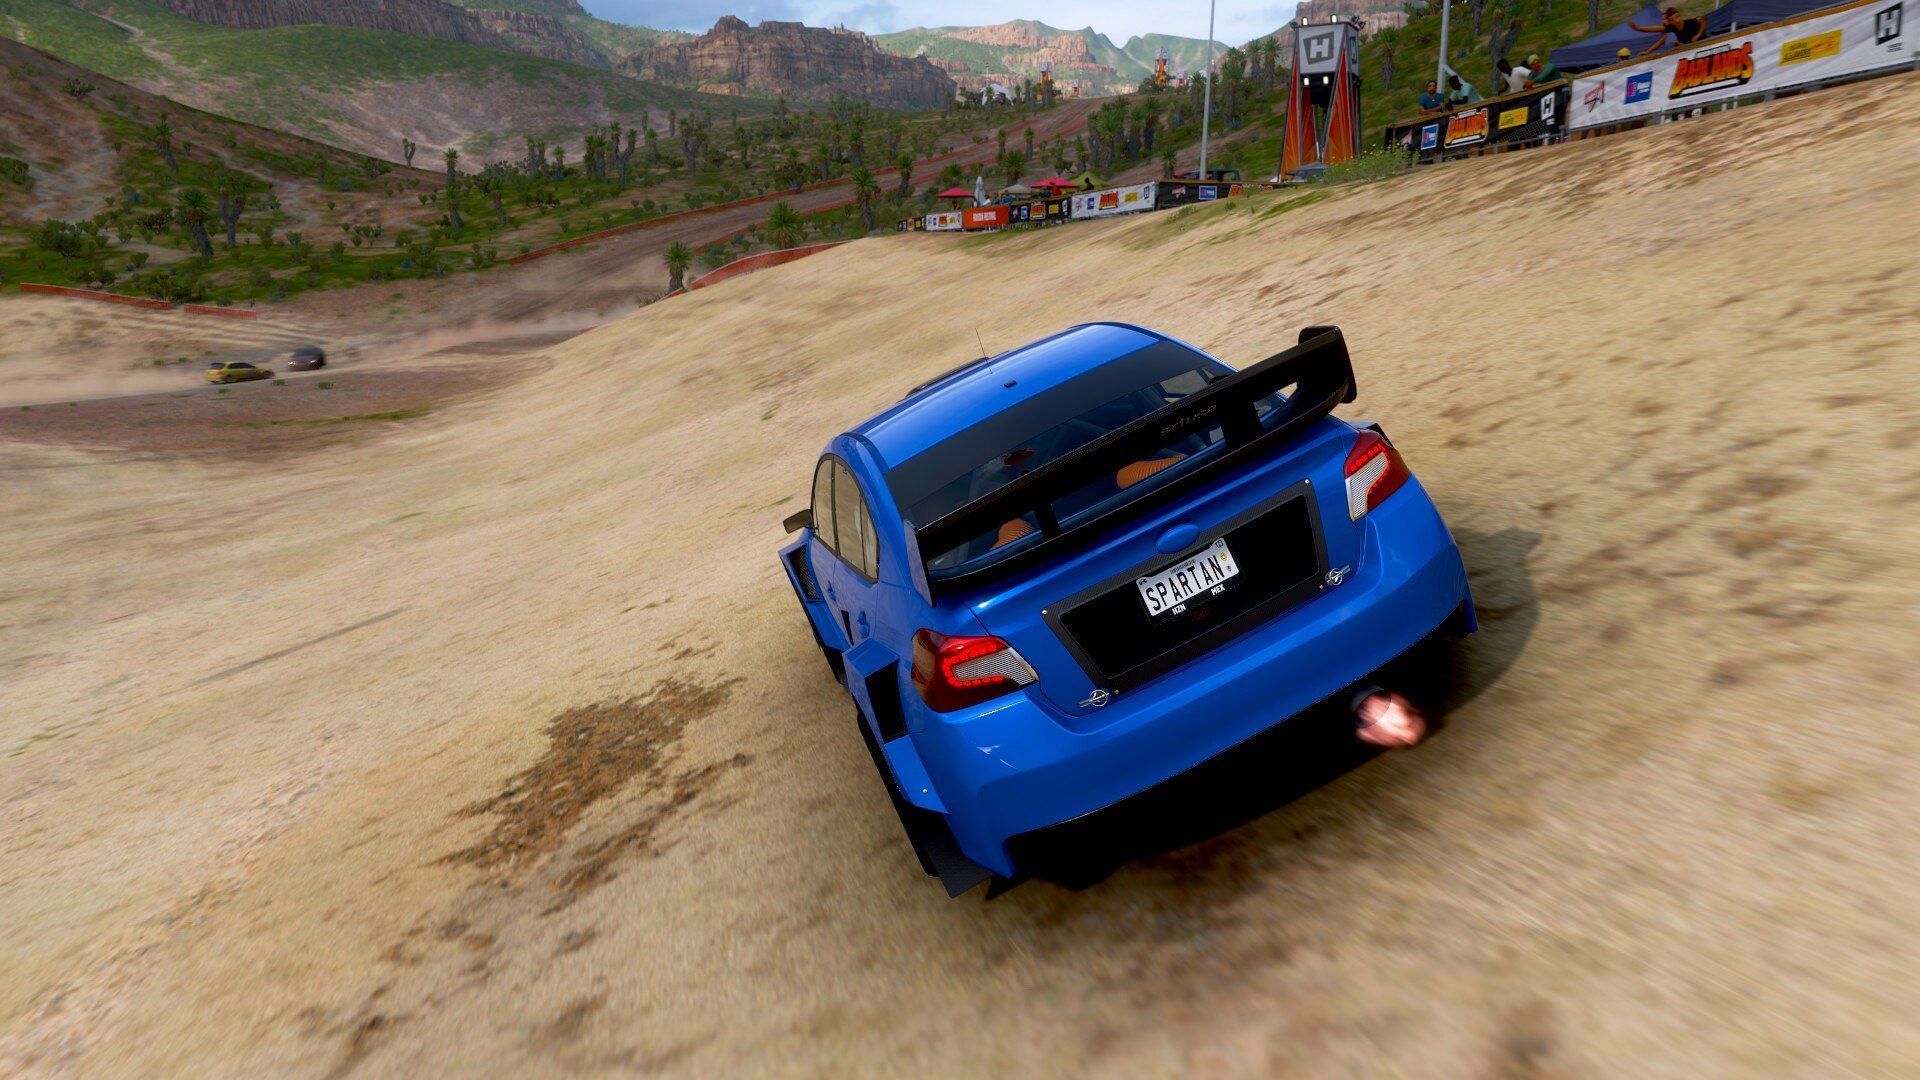 Review: 'Forza Motorsport 5' -- the competition eats its dust